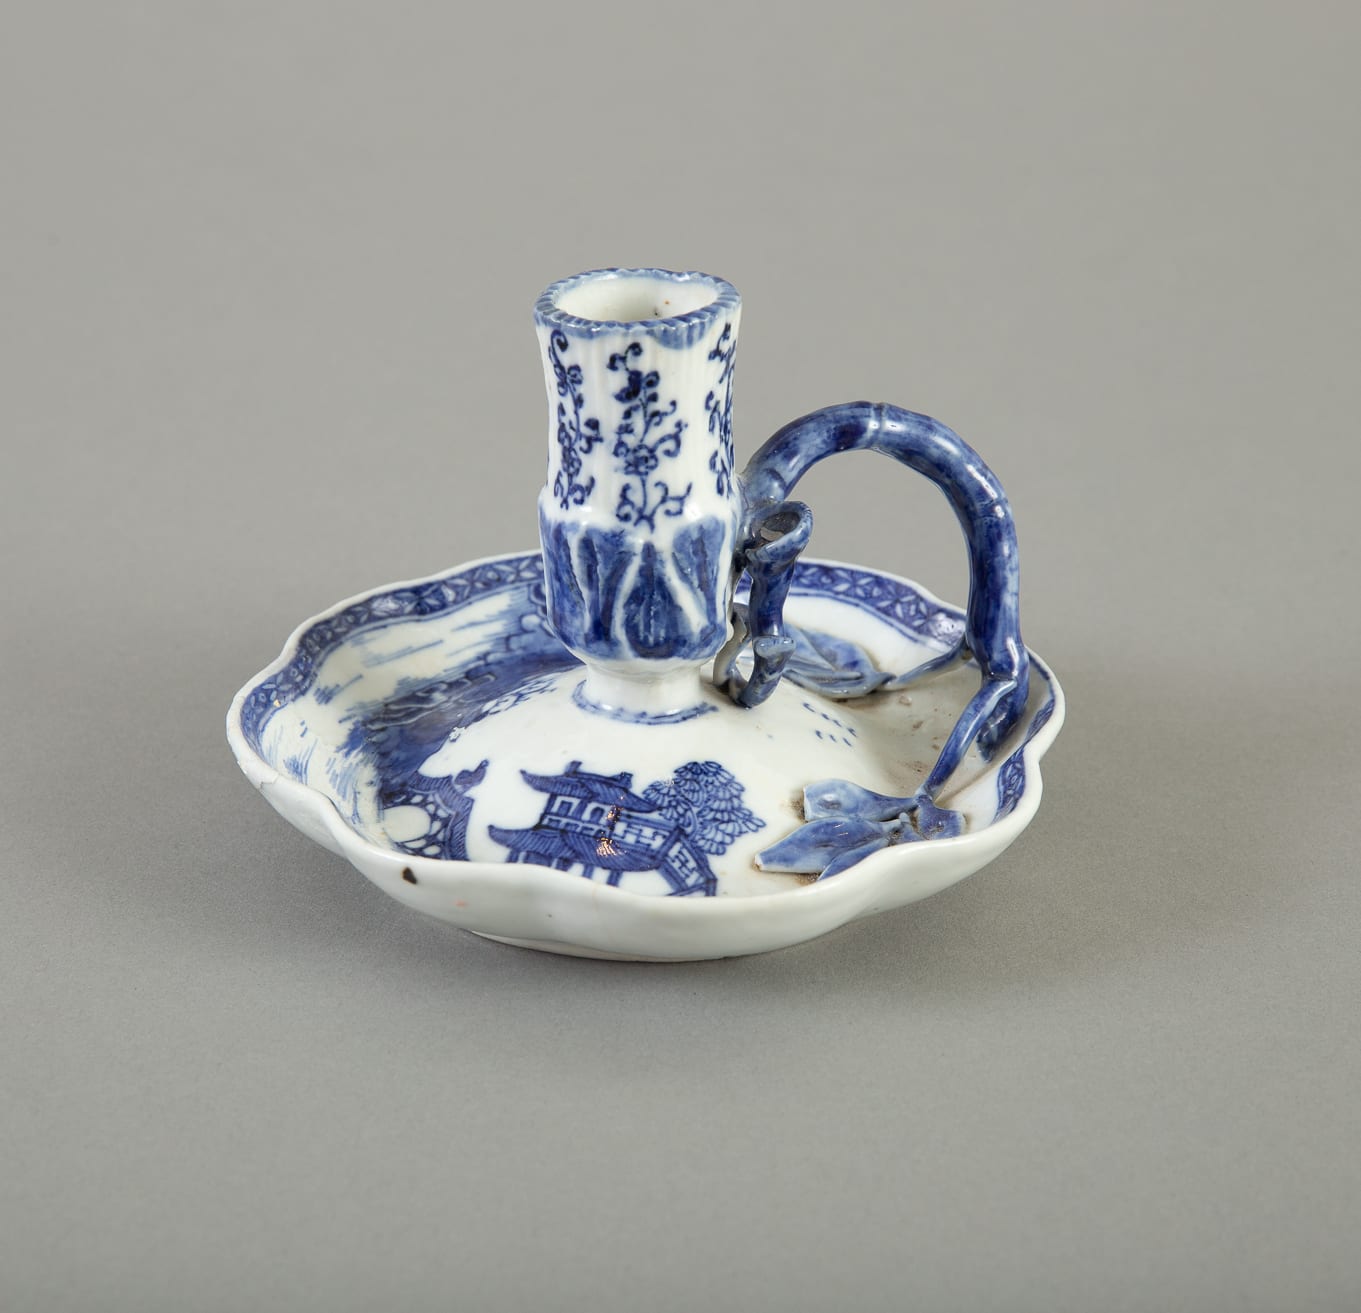 Lot 270: 18th c. Chinese Export  Porcelain Candle Holder